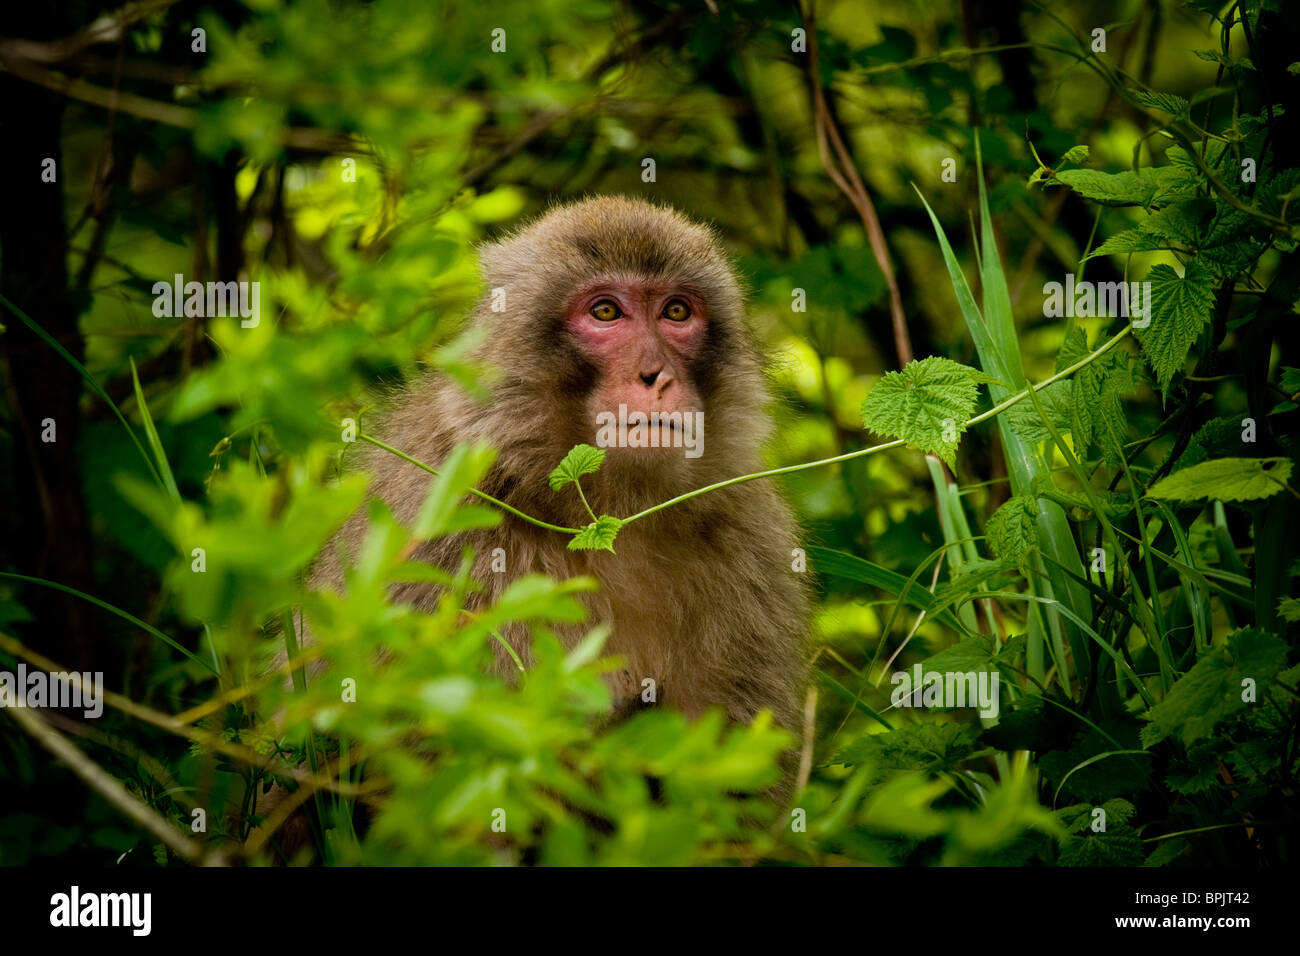 Monkey looking out of the bushes. Stock Photo